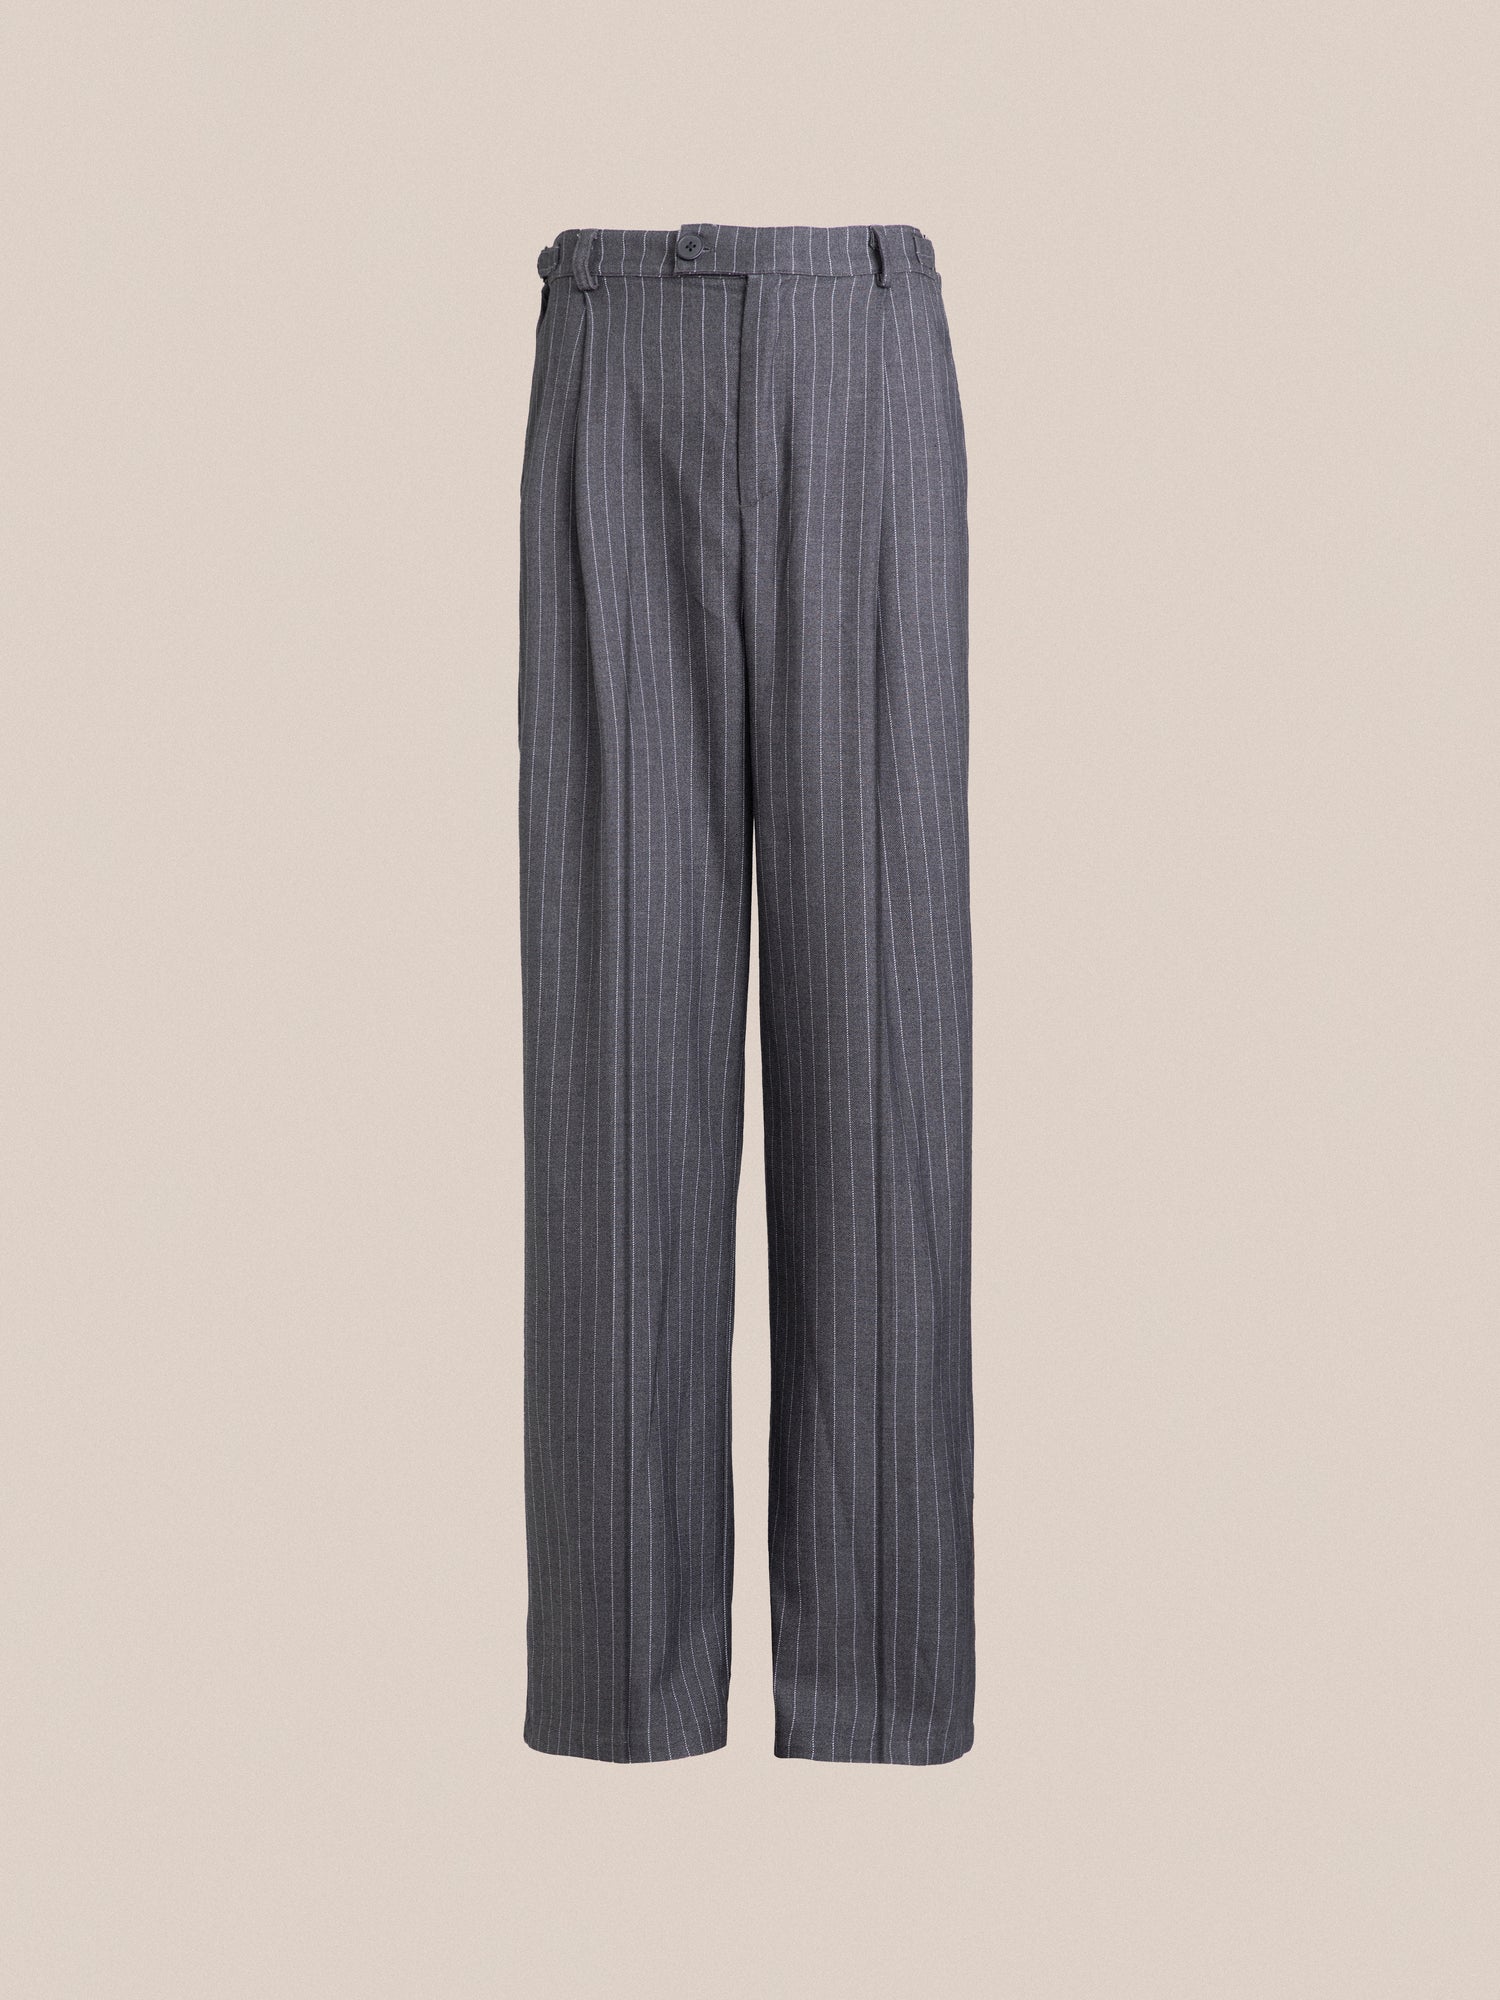 A double pleated, grey Pinstripe Pleated Trousers on a beige background by Found.